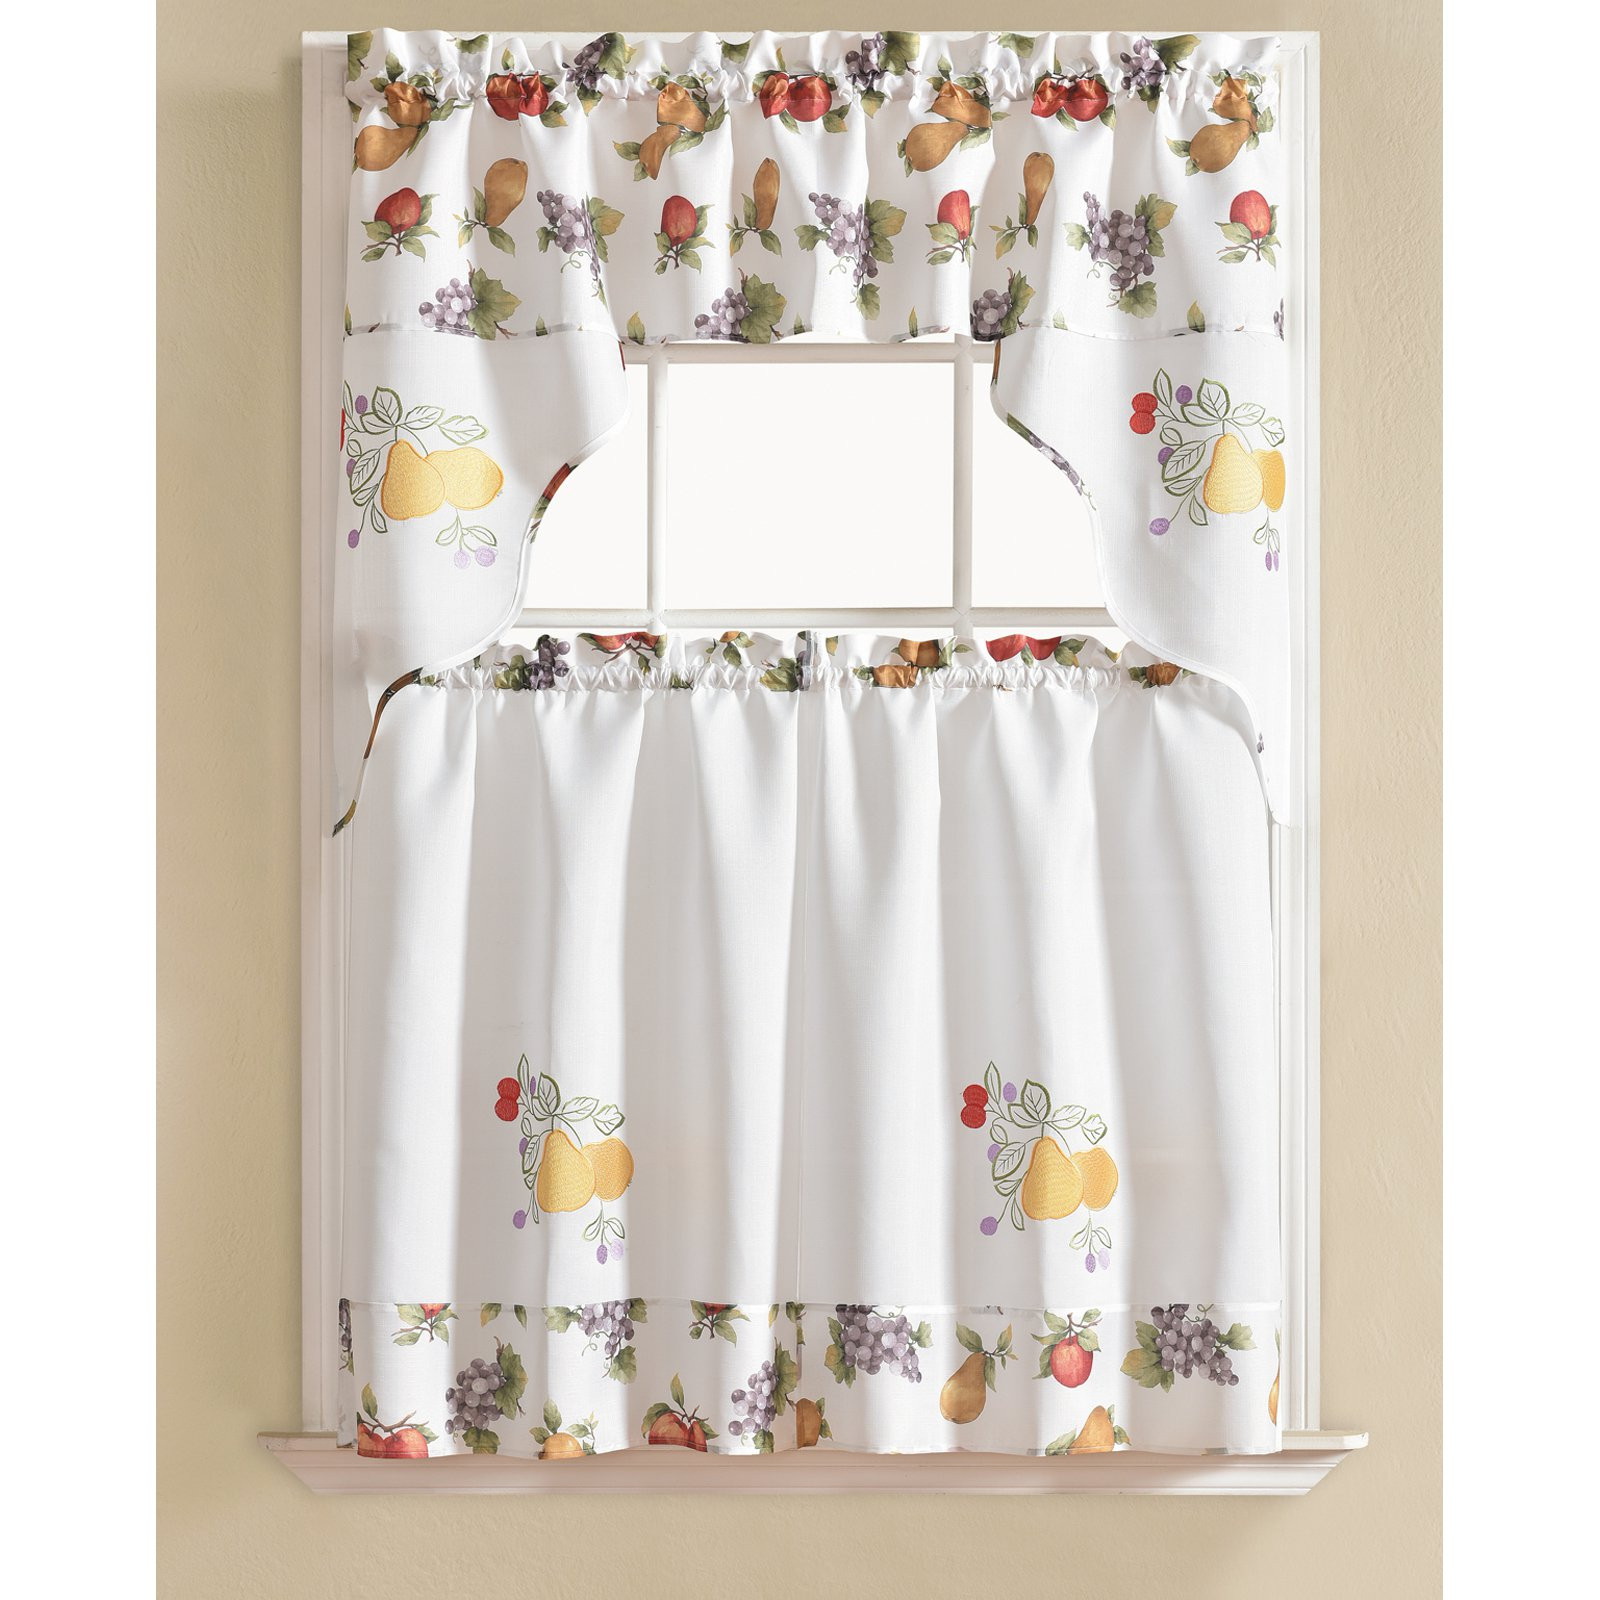 Kitchen Curtains Tier
 Urban Embroidered Pear Tier and Valance Kitchen Curtain